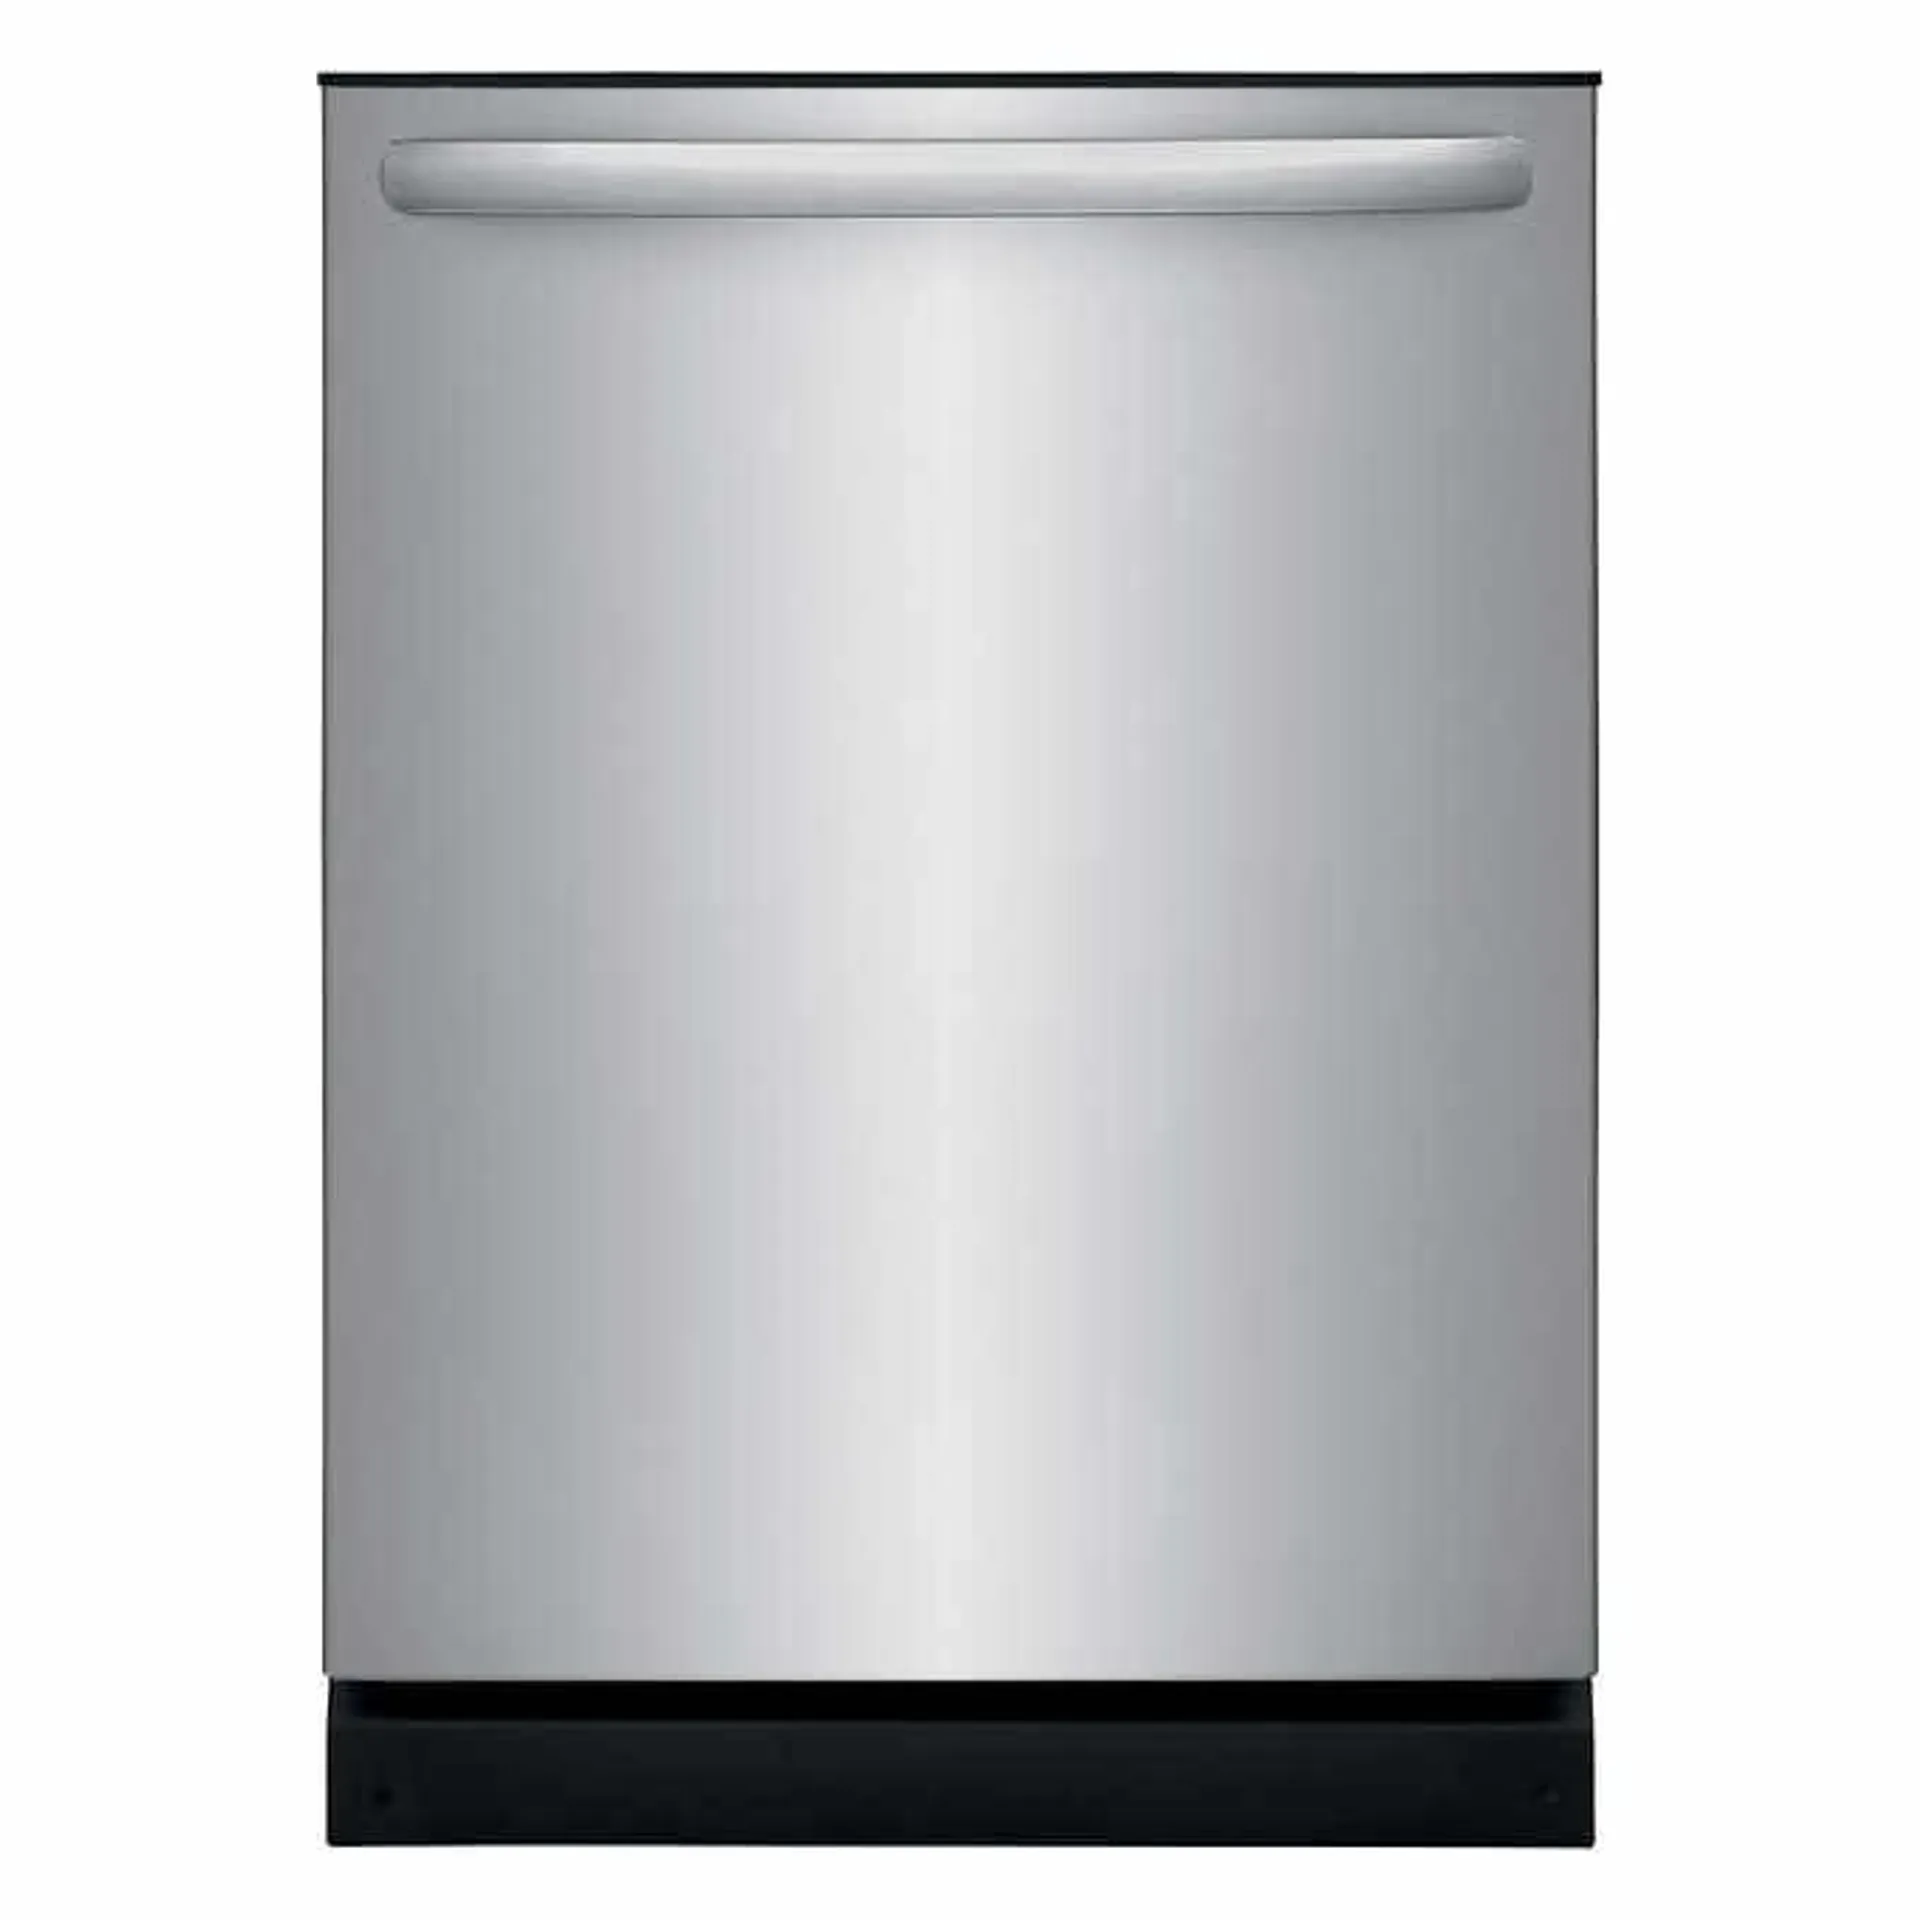 Frigidaire 24 in. Stainless Steel Built-In Dishwasher with Sanitize Cycle